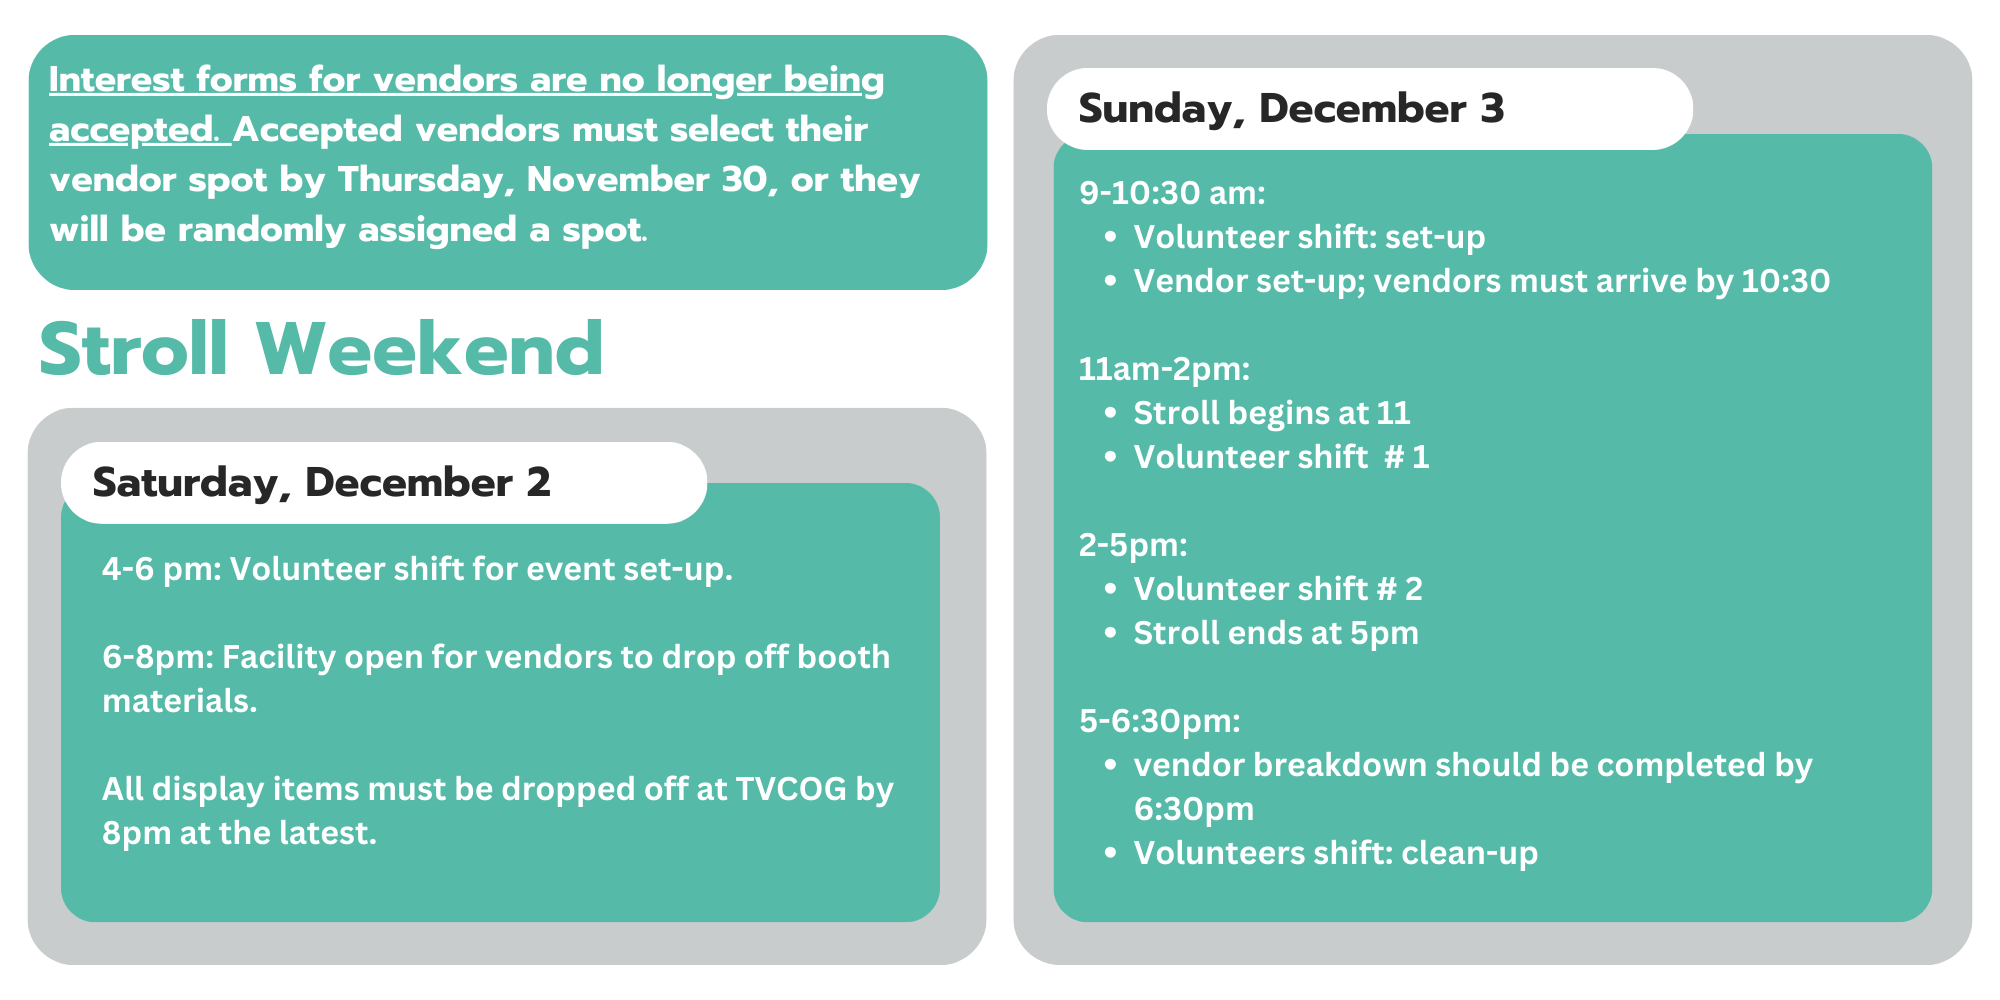 Victorian_Stroll_Schedule_Info_for_Vendors__Volunteers-_Web_Graphic_3.png - 227.29 kB